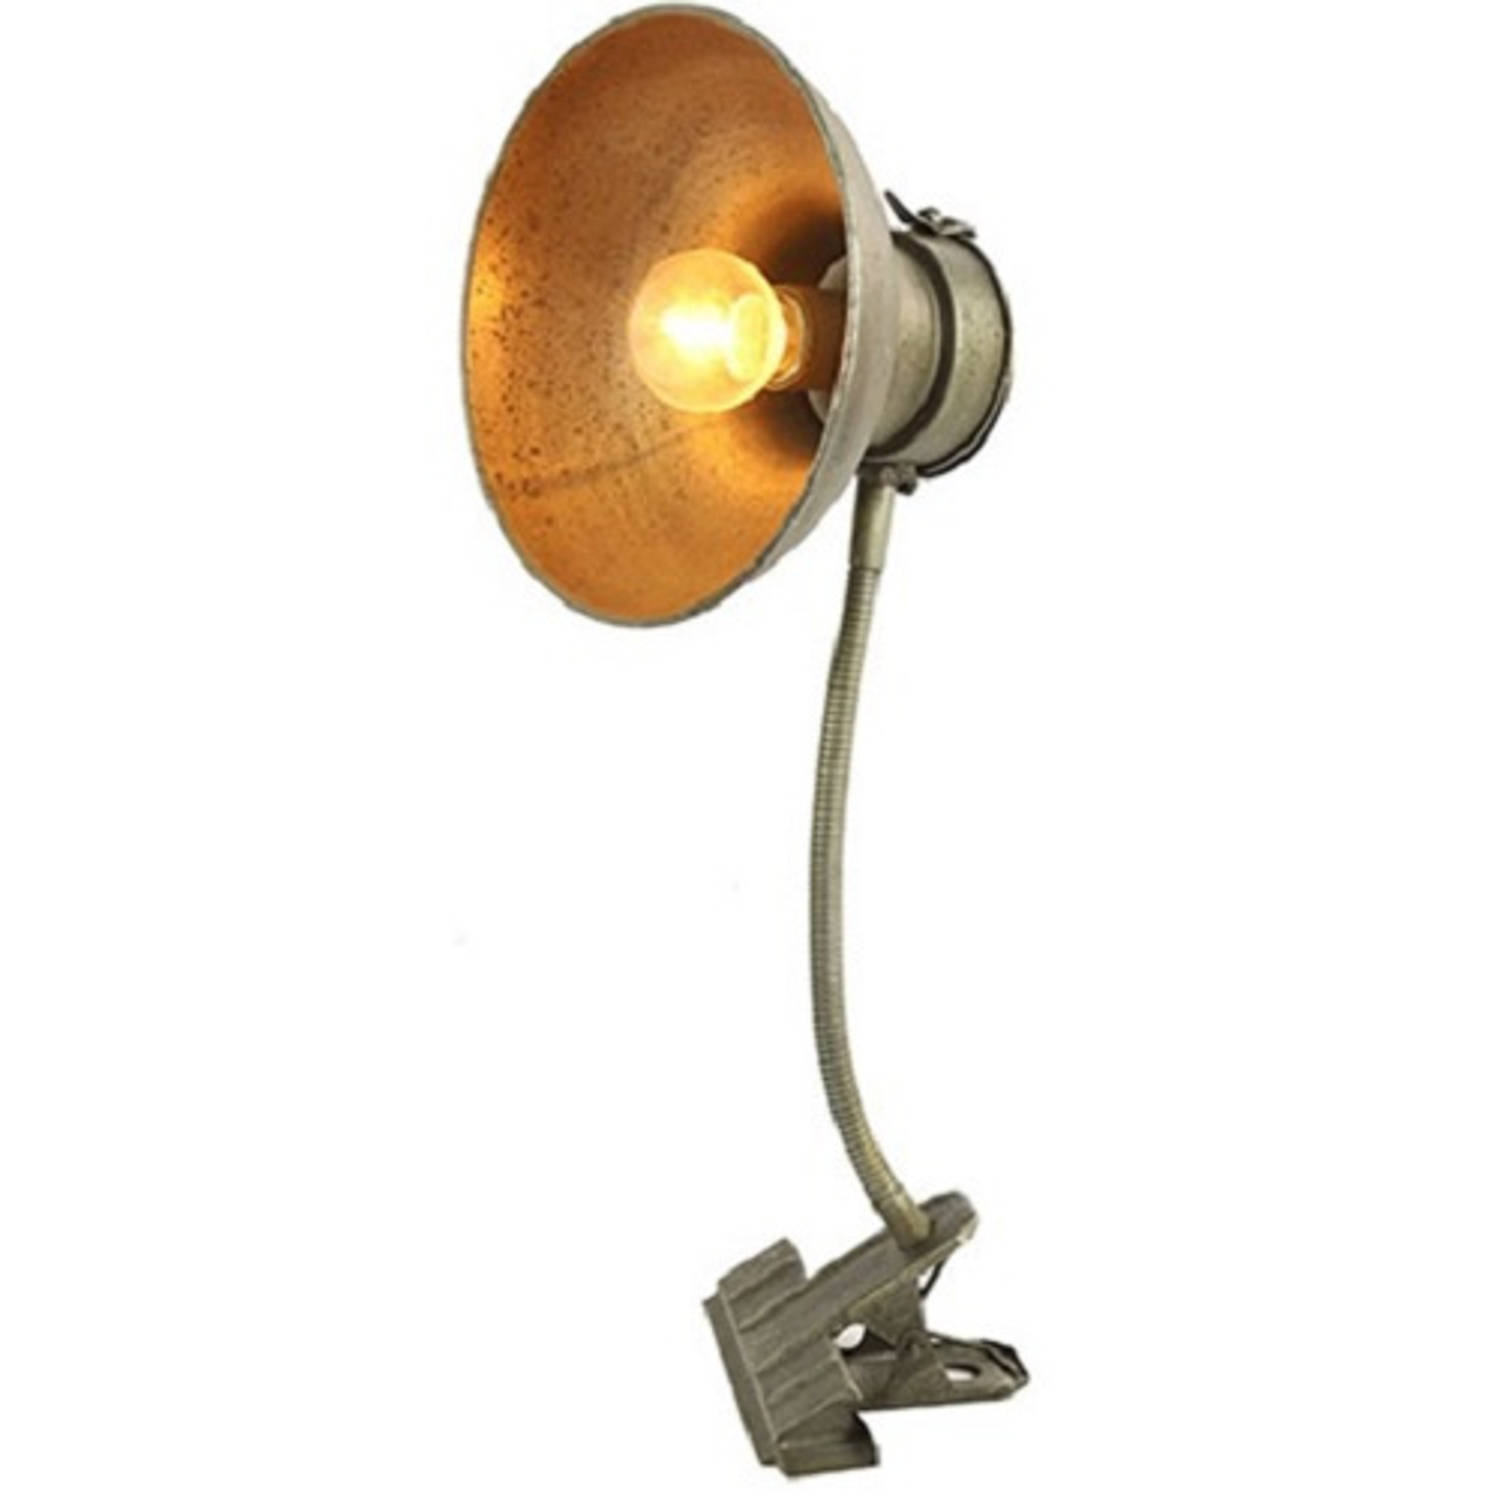 Non-Branded klemlamp Marc 17 x 12,5 x 41 cm staal brons